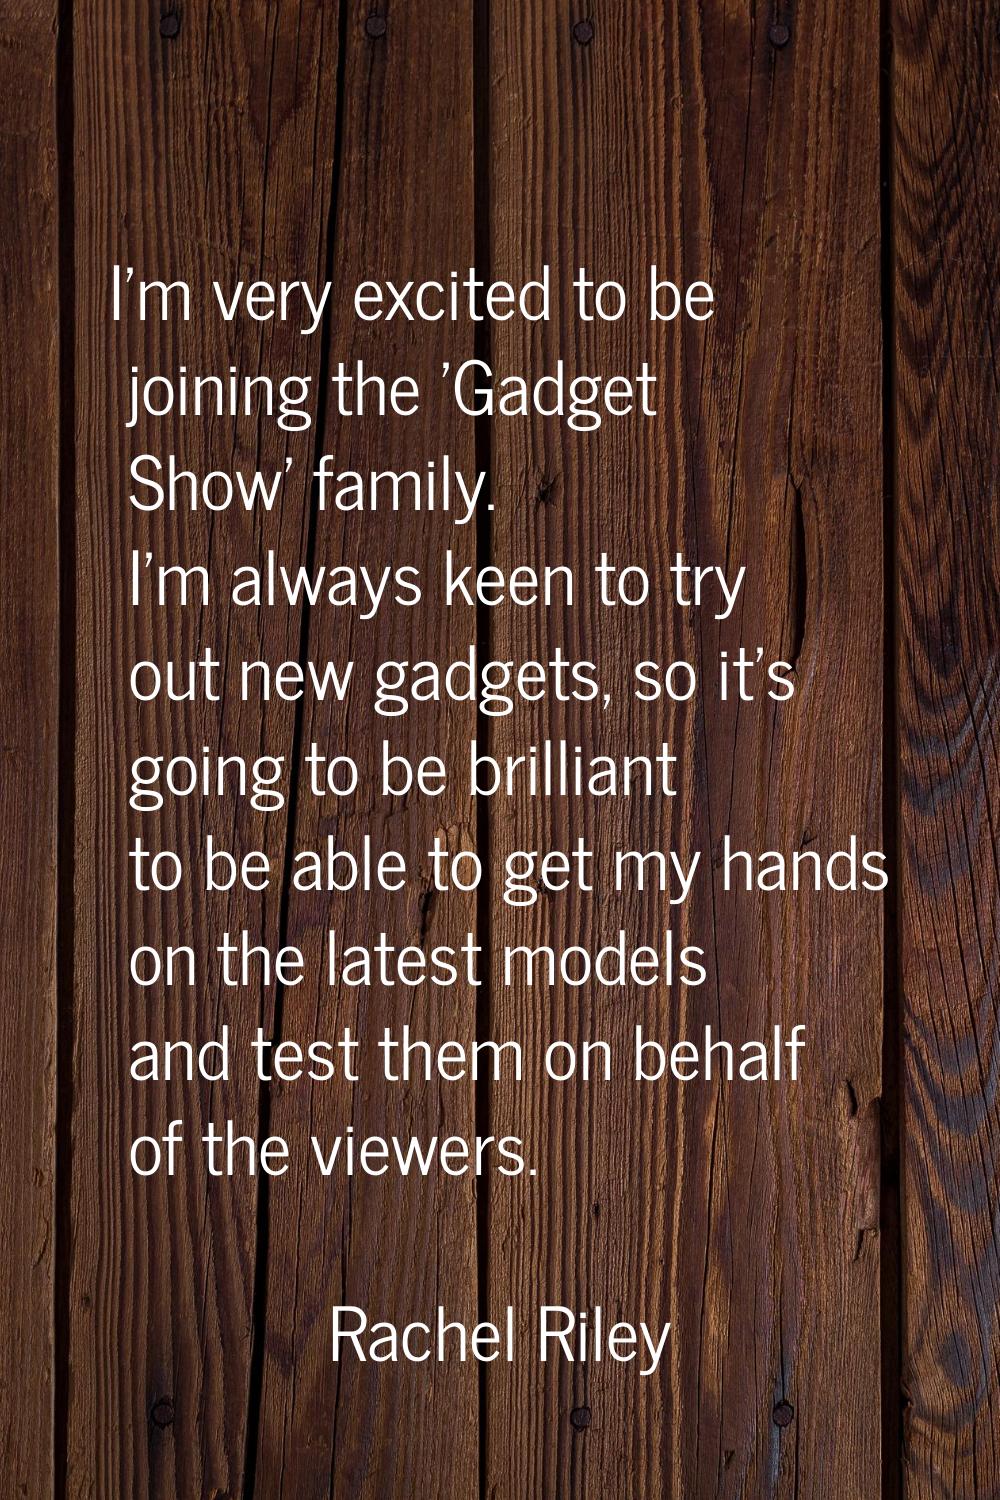 I'm very excited to be joining the 'Gadget Show' family. I'm always keen to try out new gadgets, so